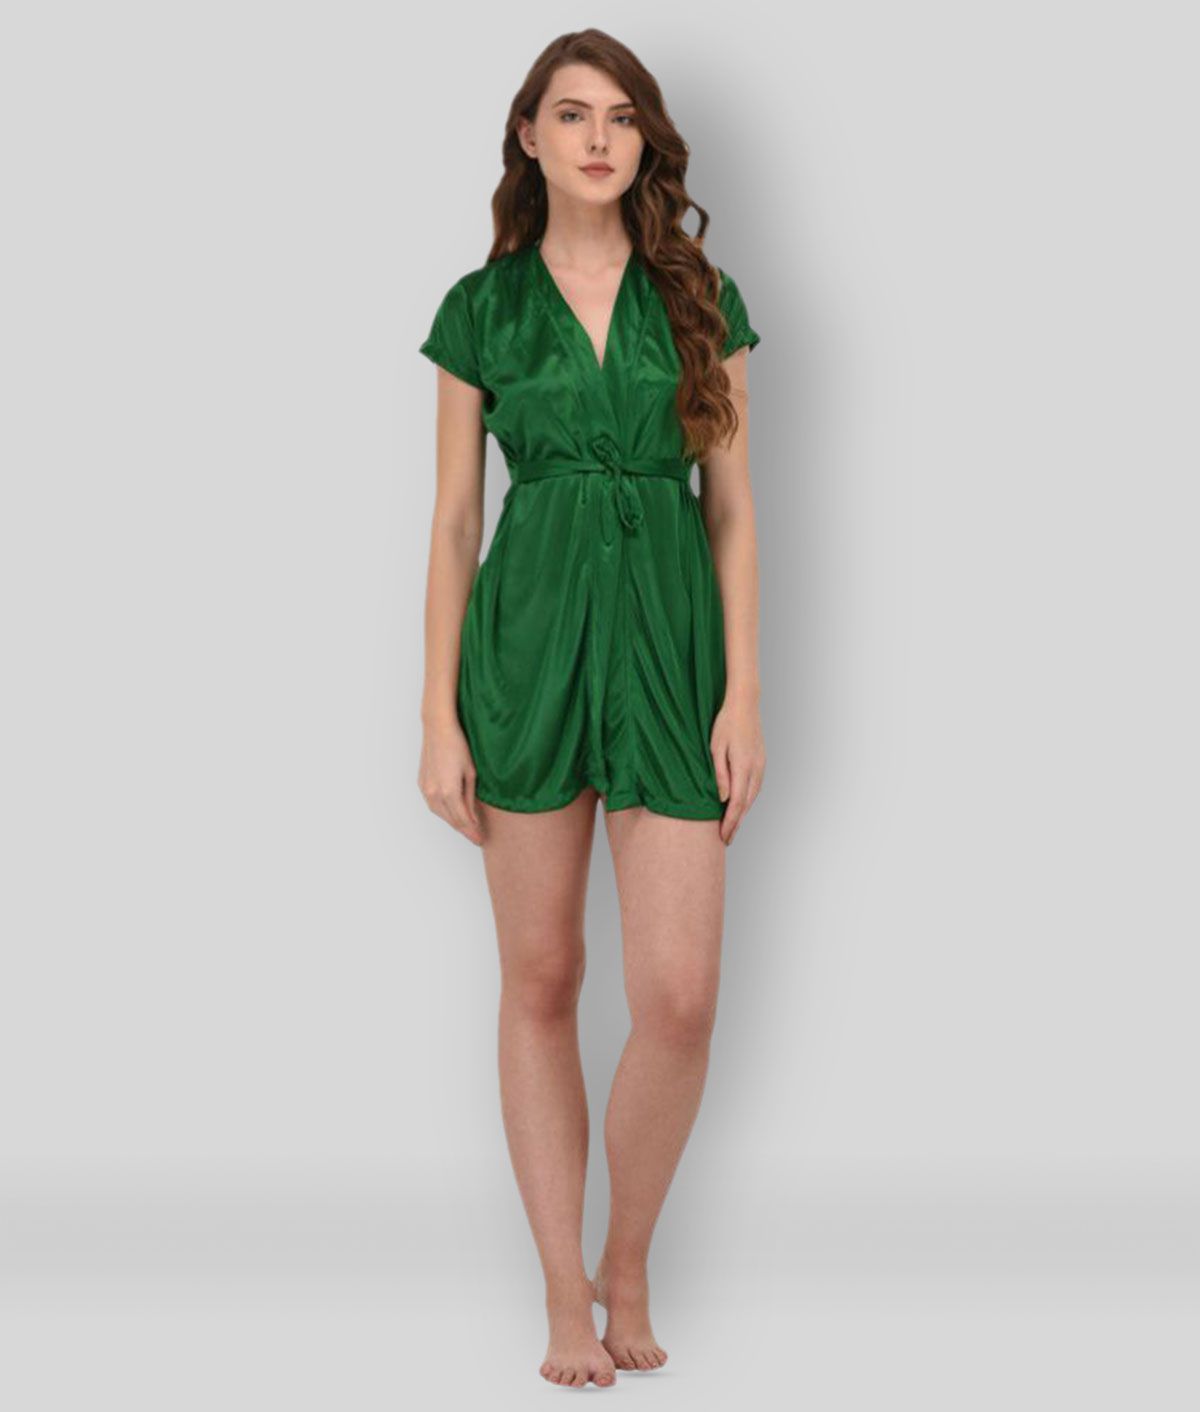     			You Forever - Green Satin Women's Nightwear Robes ( Pack of 1 )